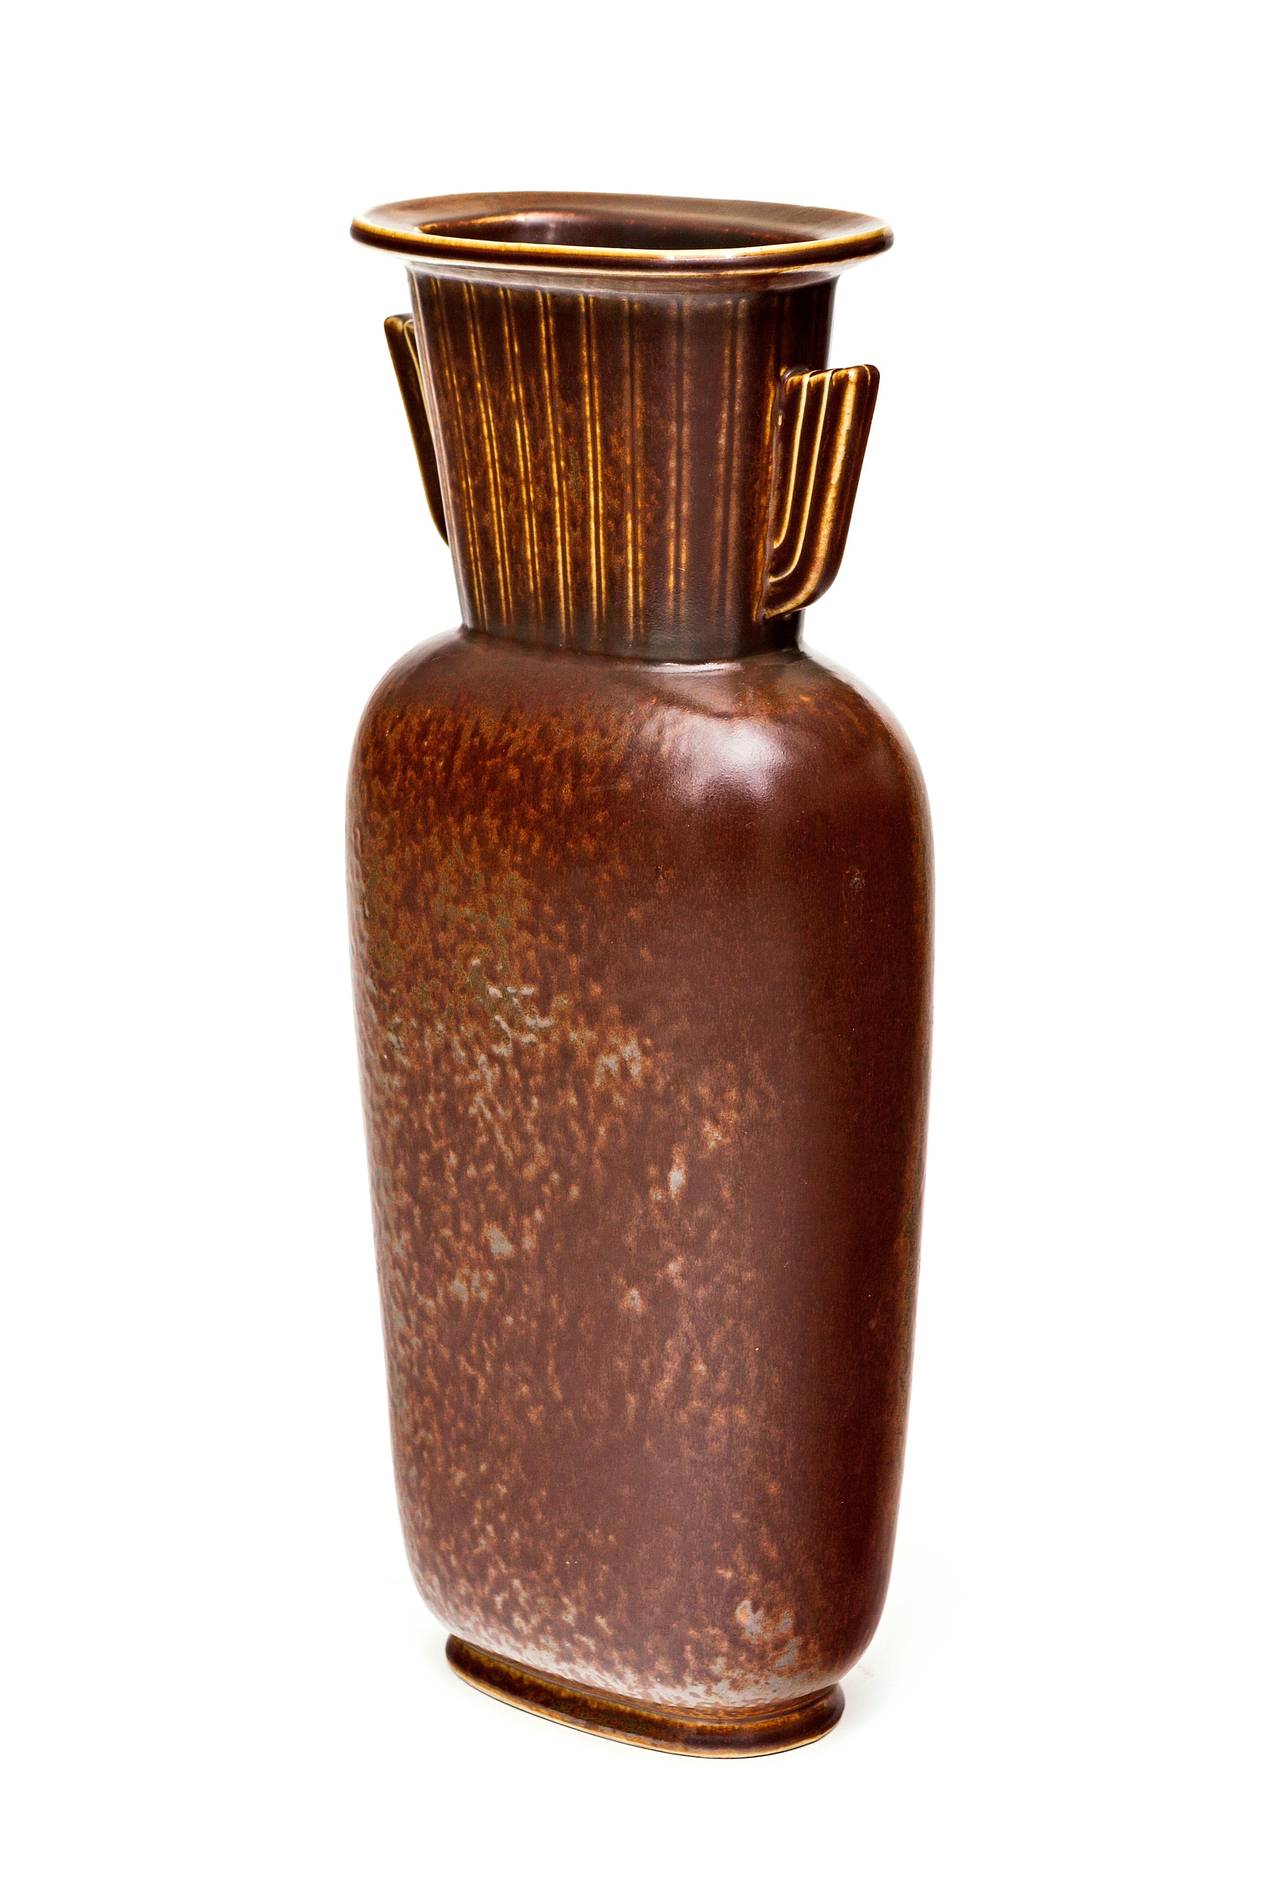 Fabulous and rare Gunnar Nylund for Rörstrand vase in mottled chocolate brown and copper glaze. 

Nylund worked for Rorstrand from 1931–1955, where the majority of the time he served as the artistic director. To this day, Nylund is considered one of